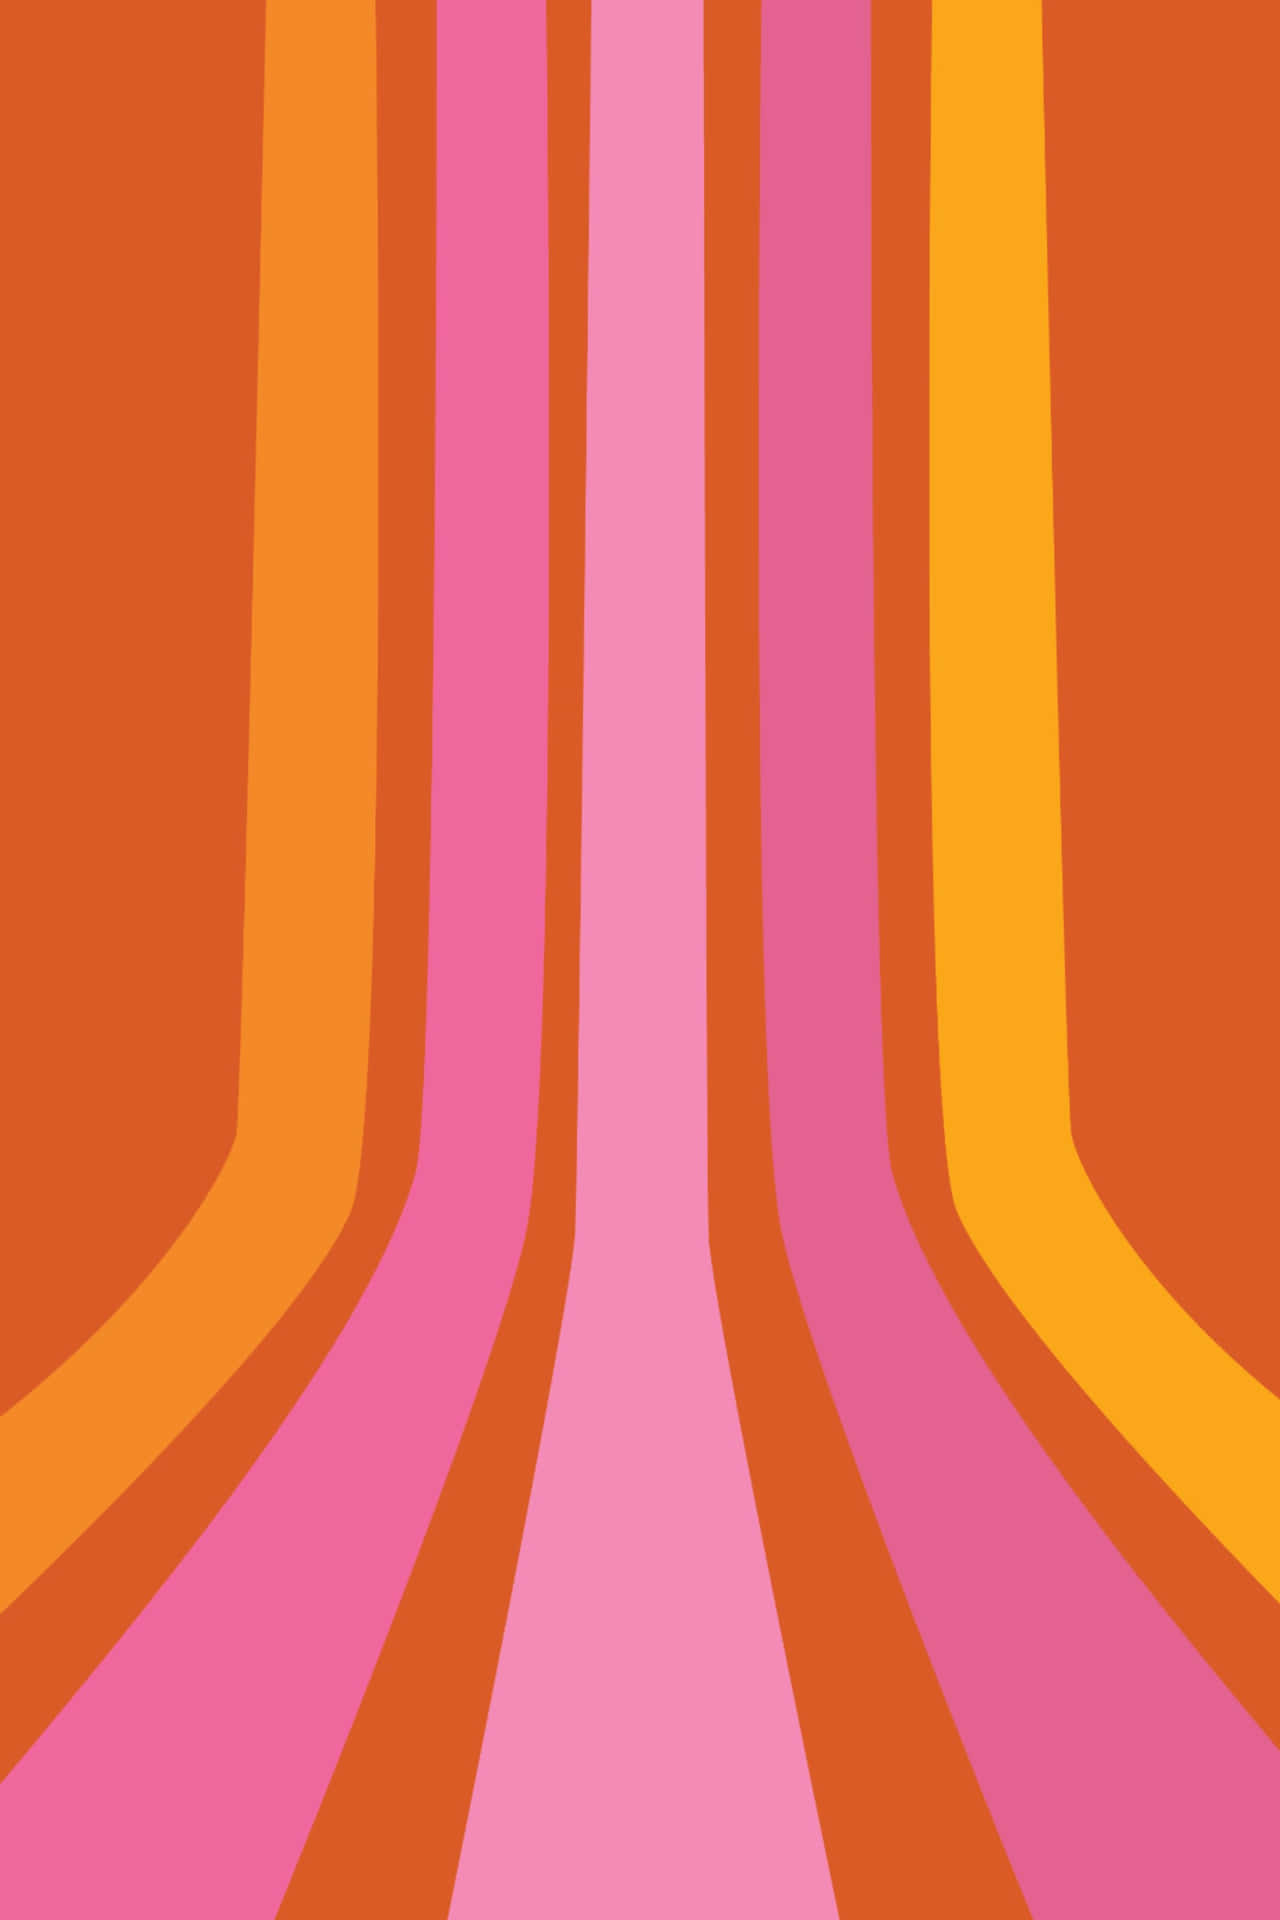 An Orange And Pink Striped Background Wallpaper